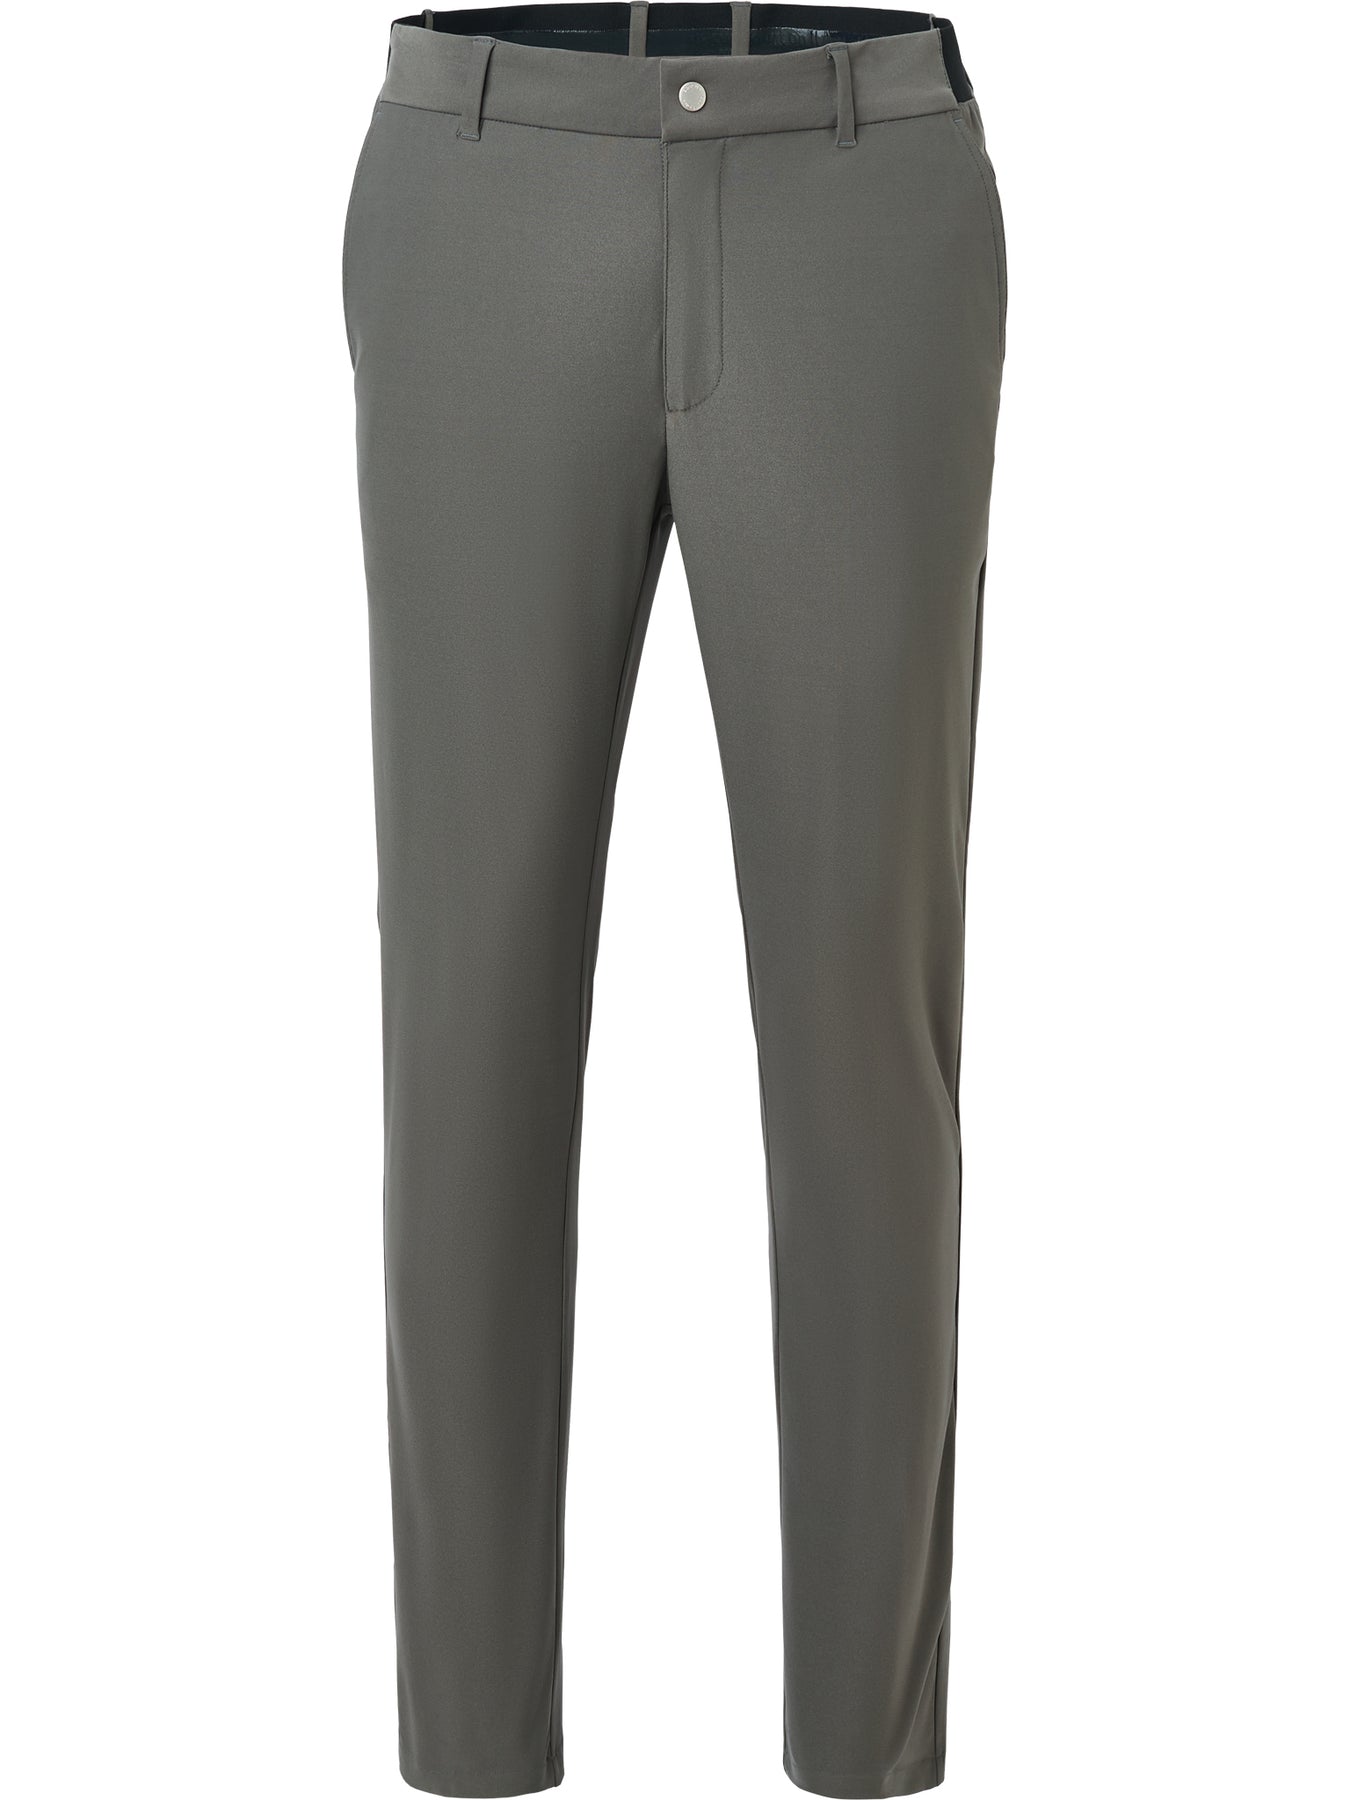 Abacus Sports Wear: Men’s 4 Way Stretch Trousers – Mellion